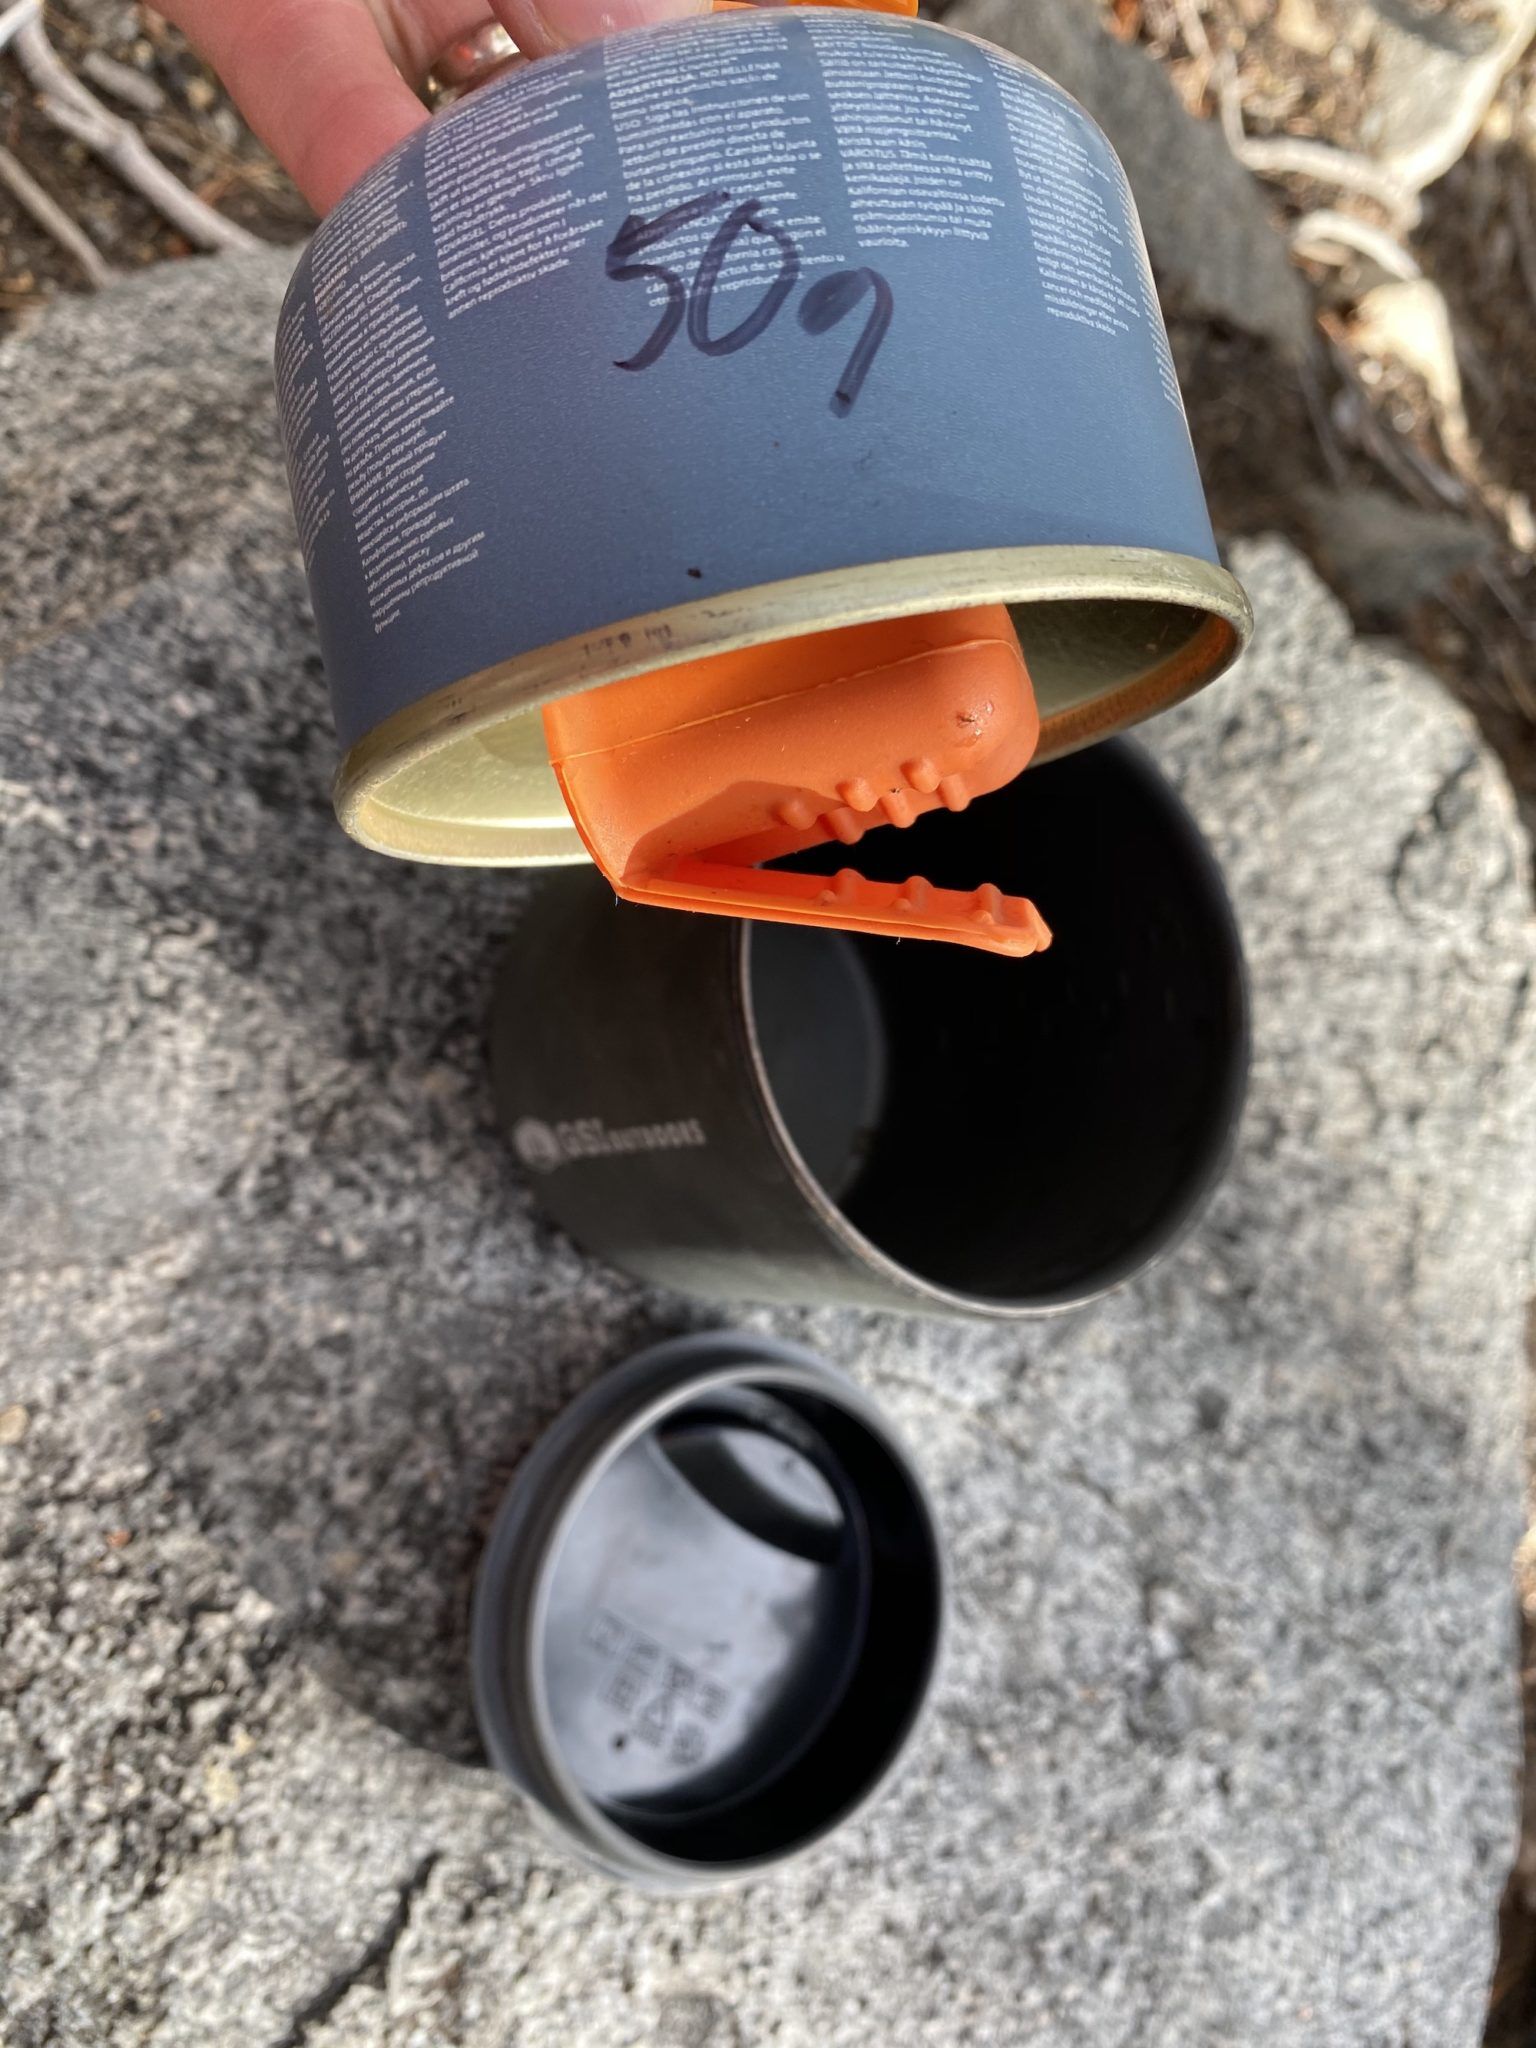 The pot holder is attached to the bottom of the fuel canister with a magnet.